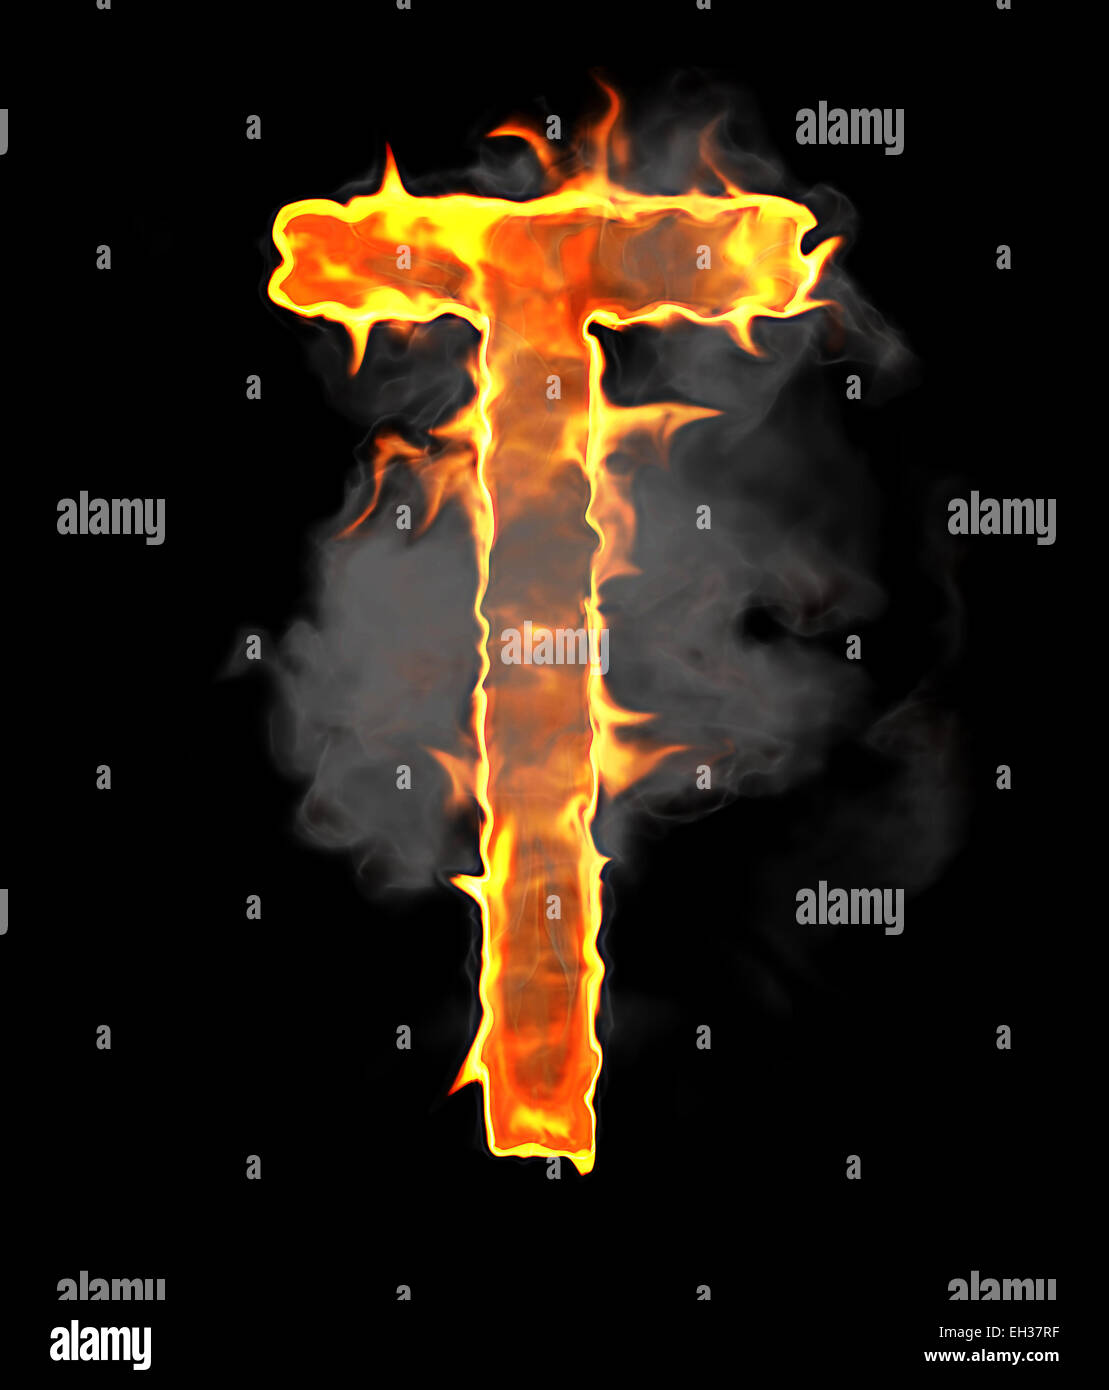 Burning and flame font T letter over black background Stock Photo